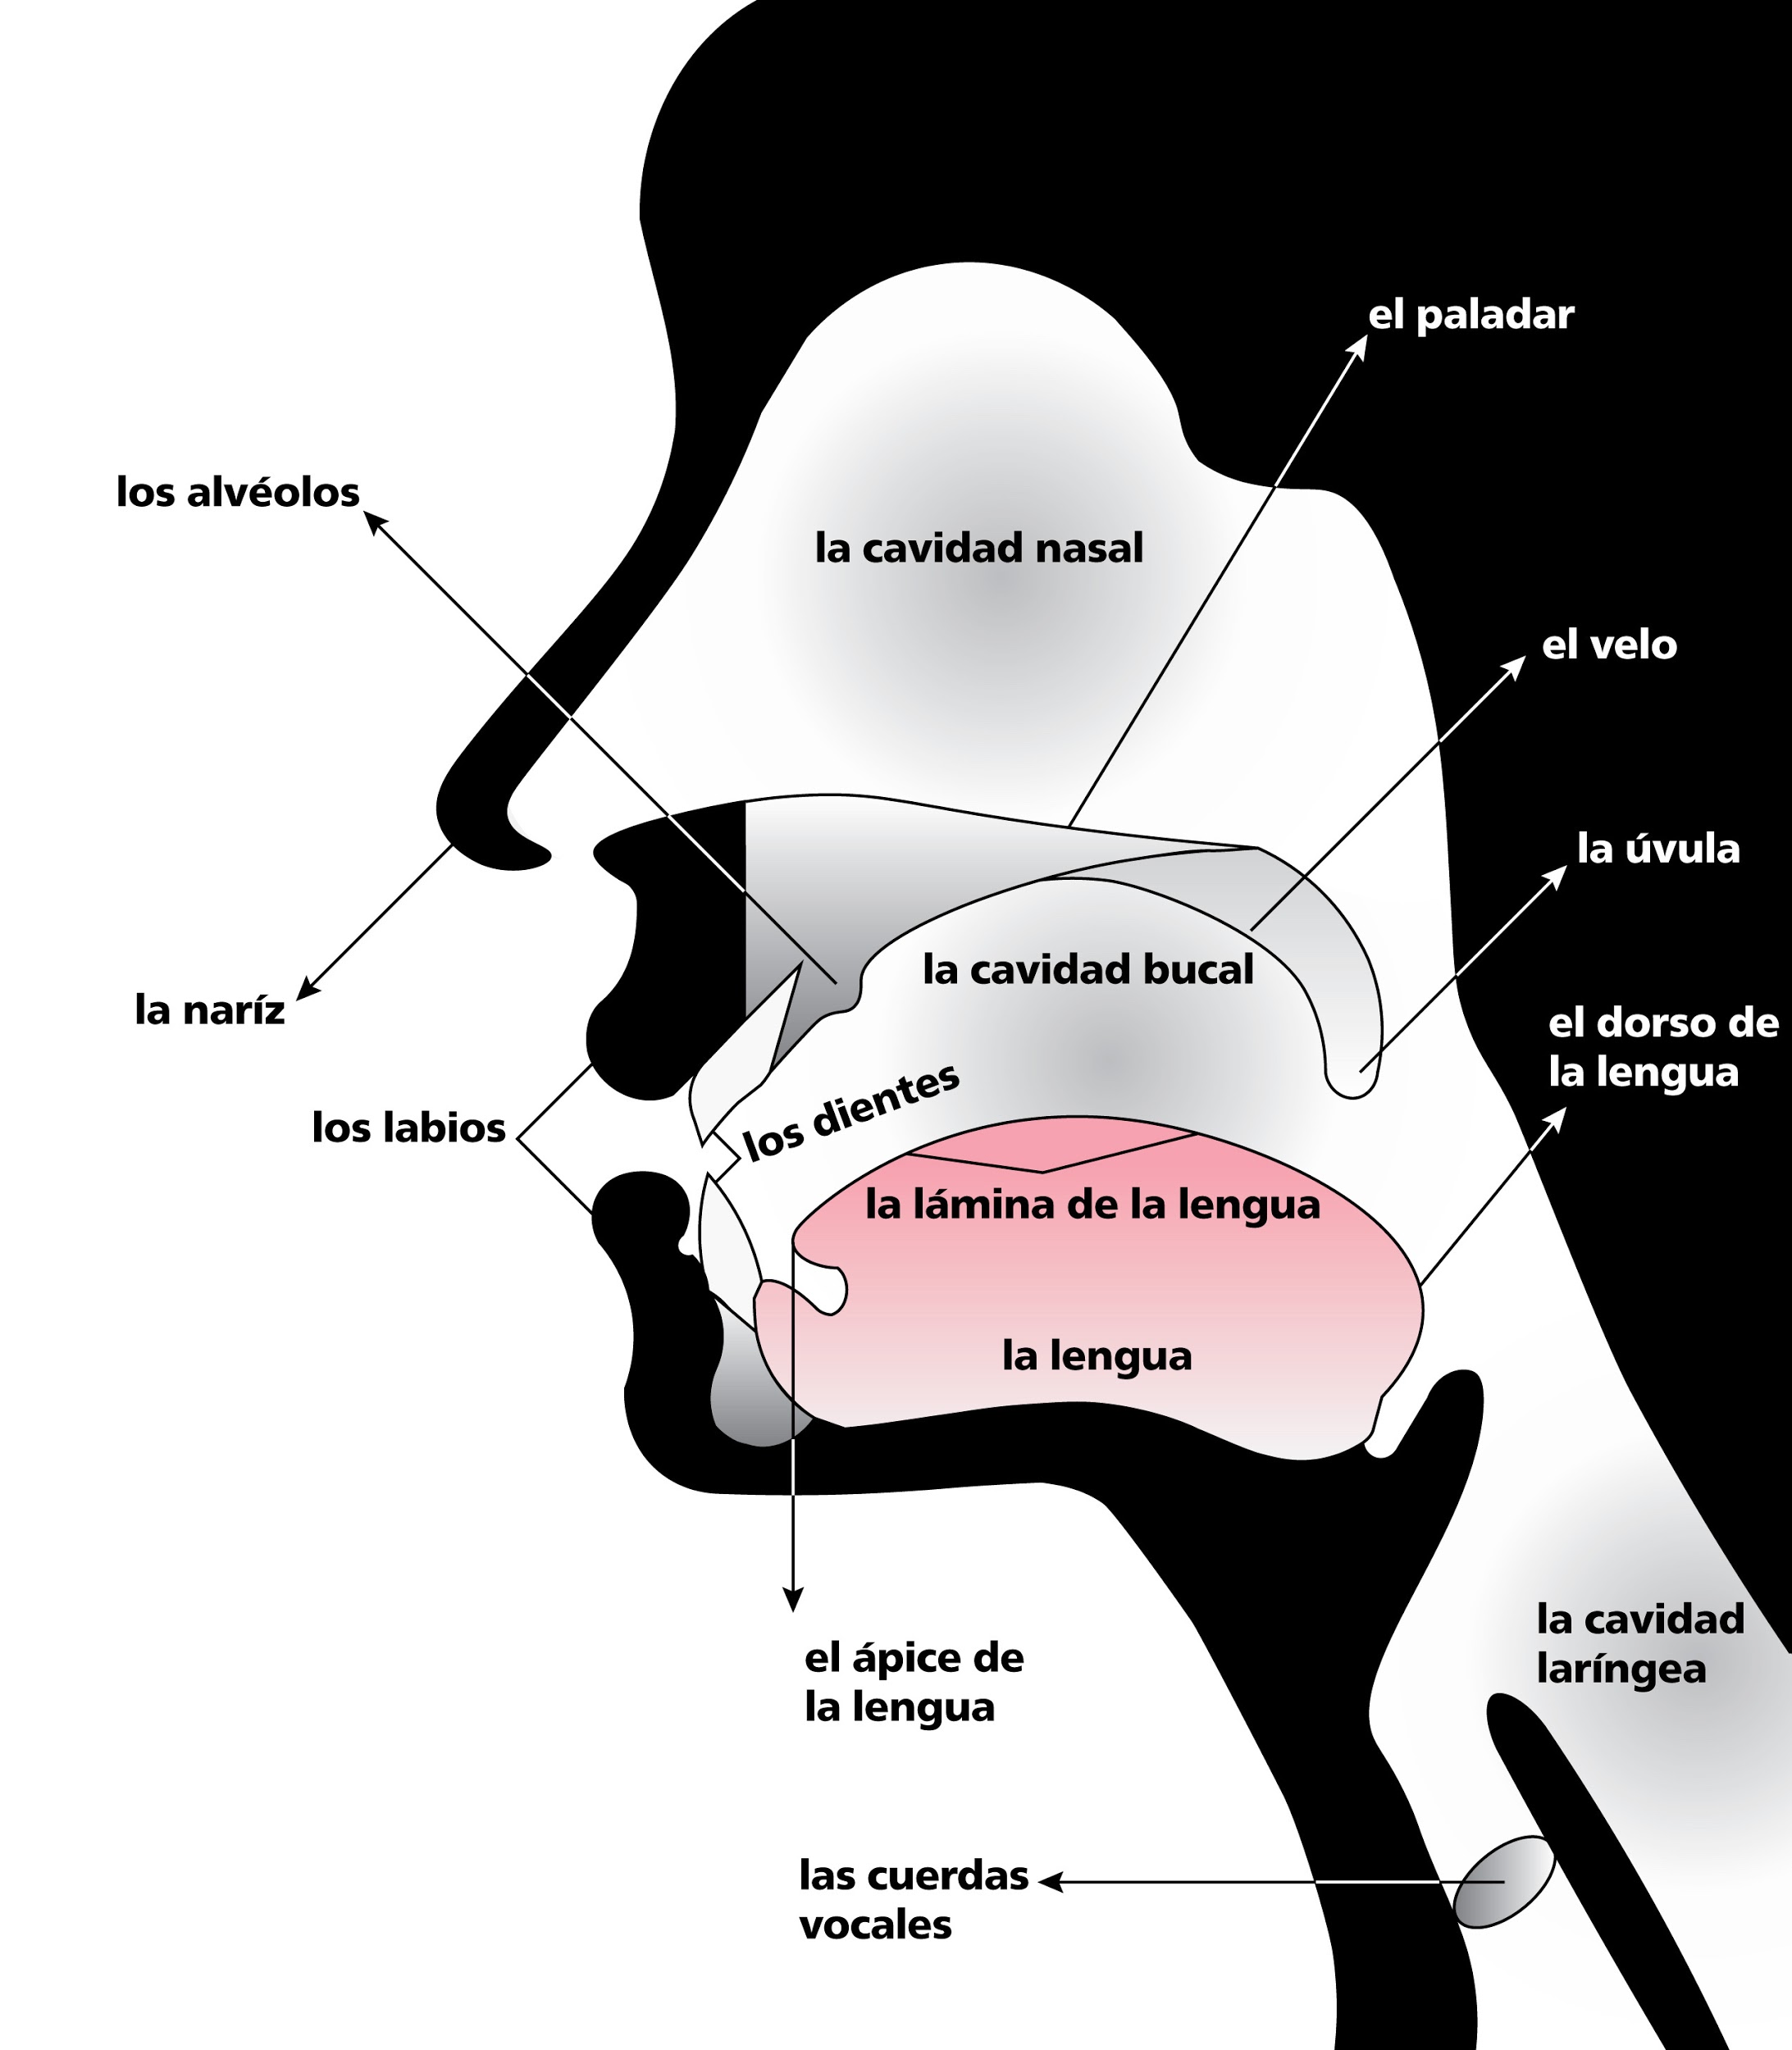 anatomical sketch of nose and throat, labeled in Spanish